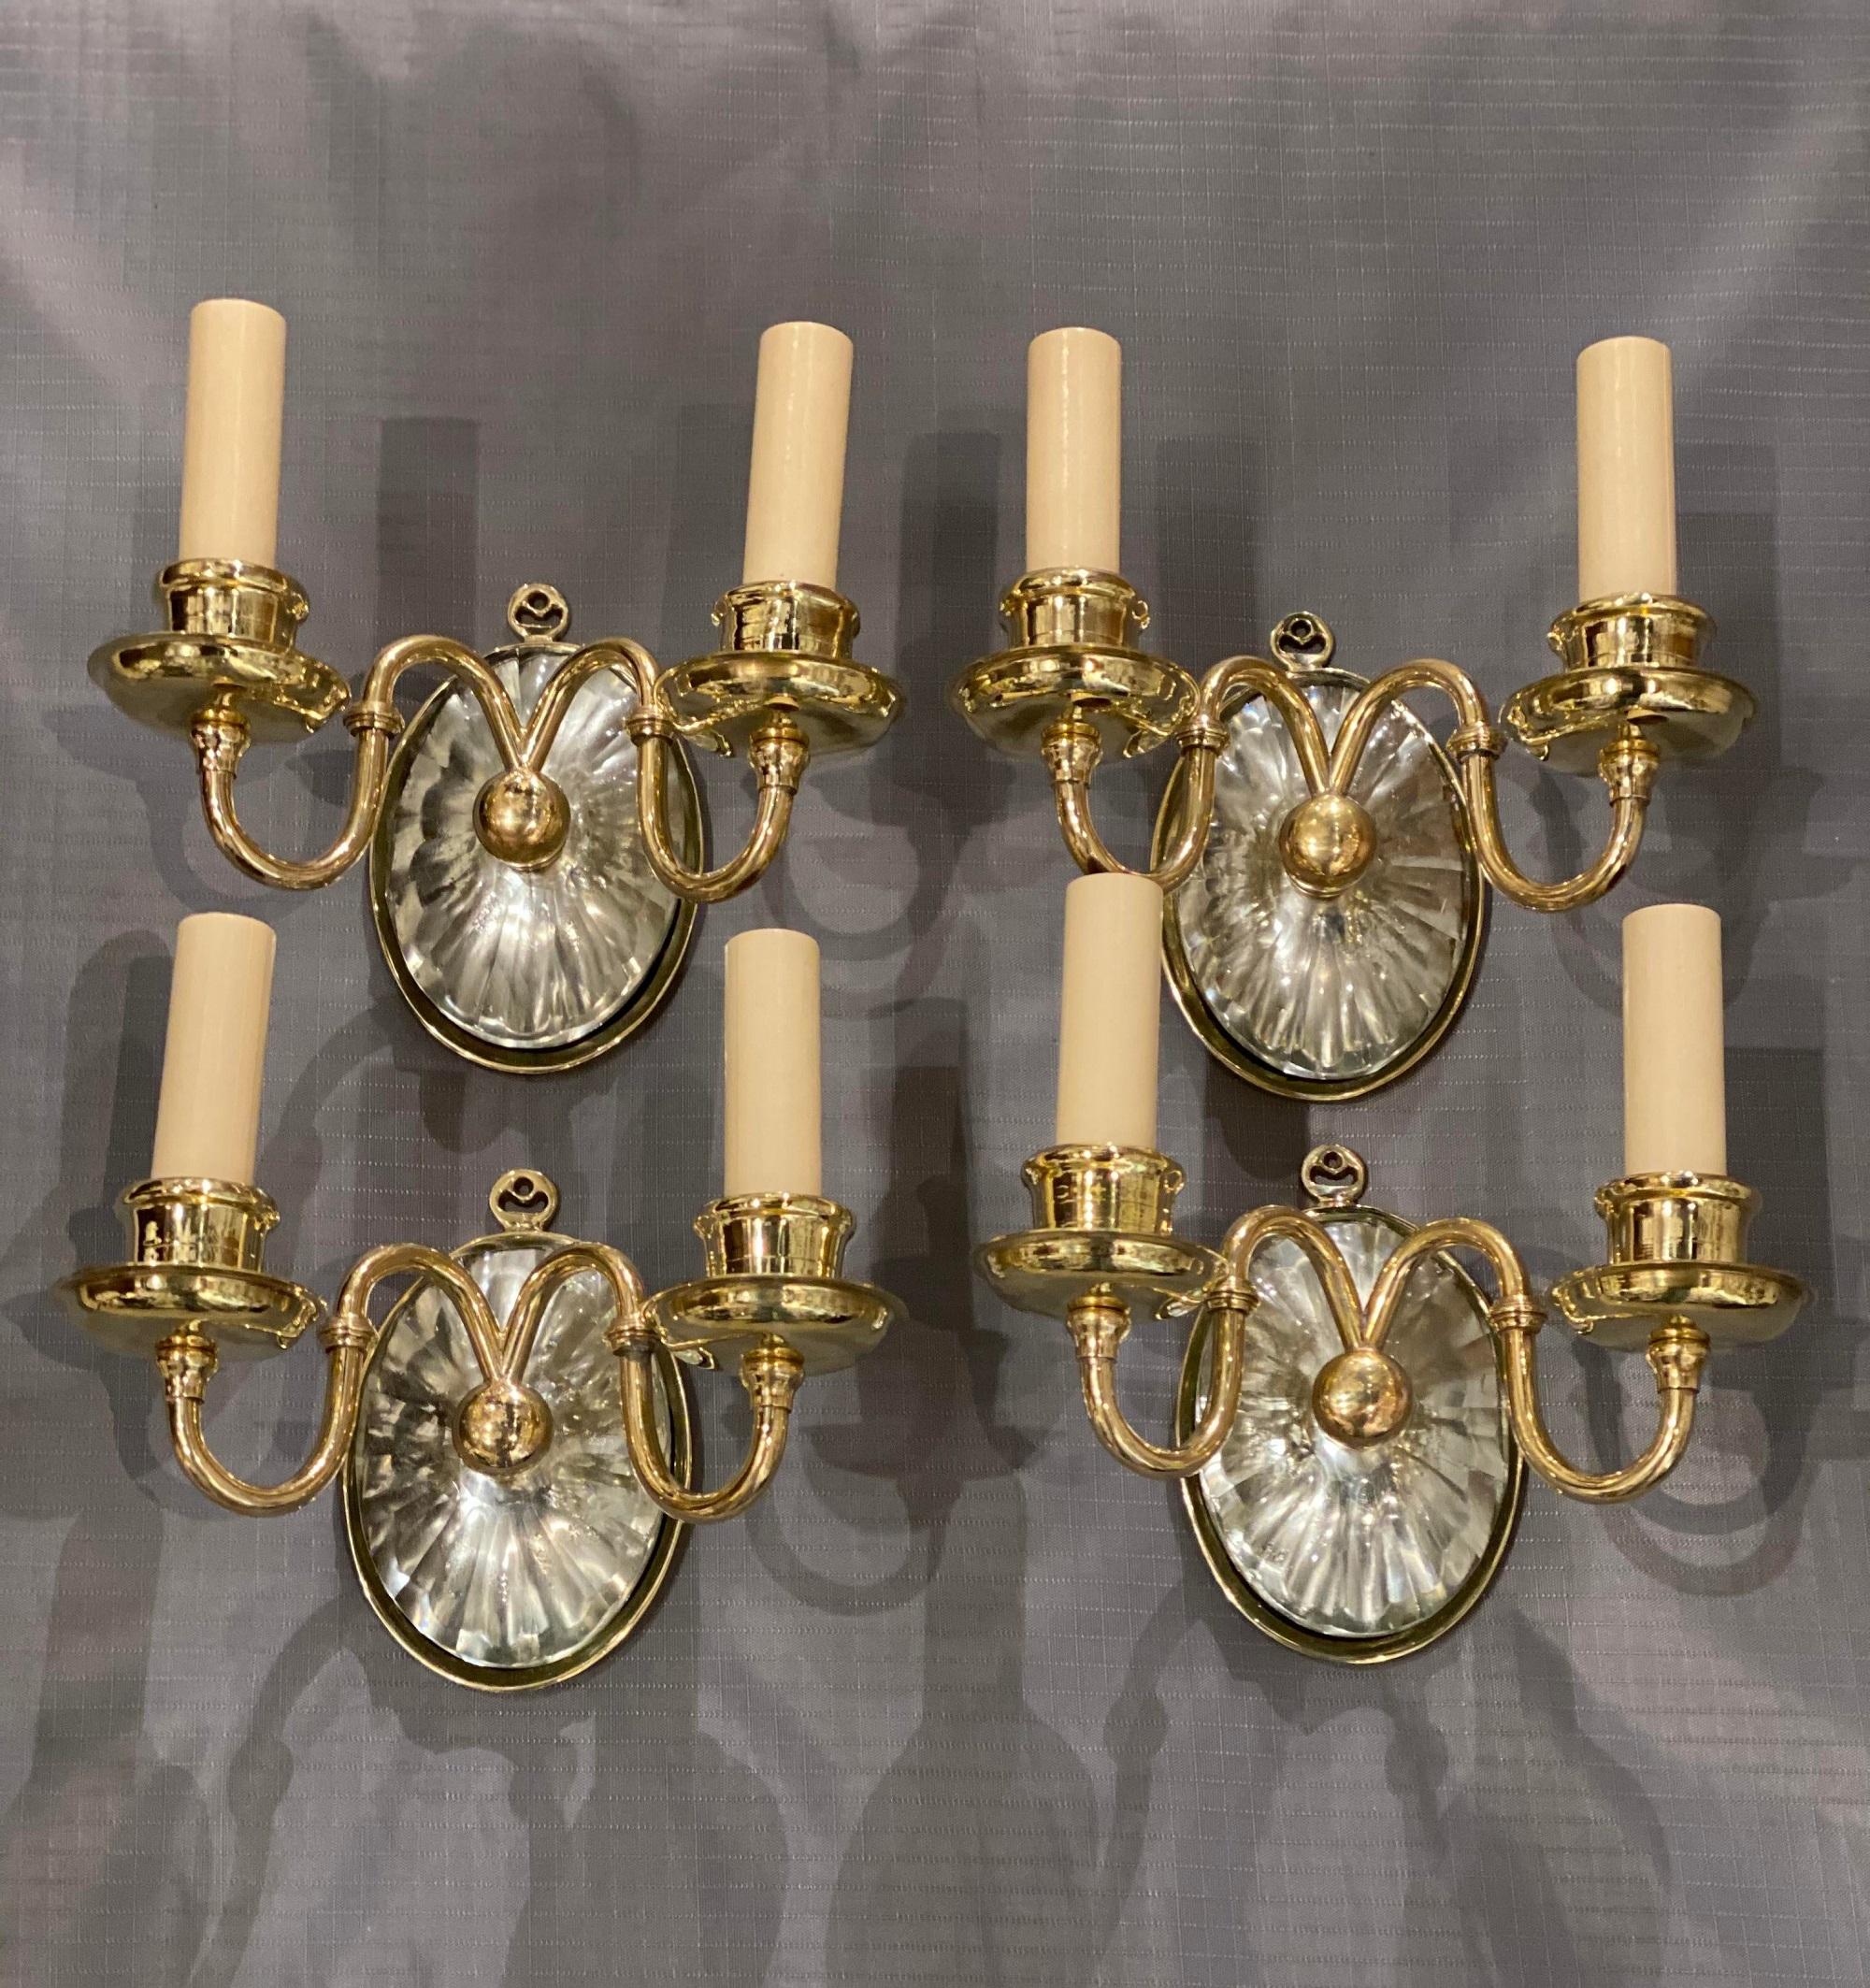 A pair of gilt bronze and mirrored backplate Caldwell small sconces, circa 1920s. In very good vintage condition.

Dealer: G302YP